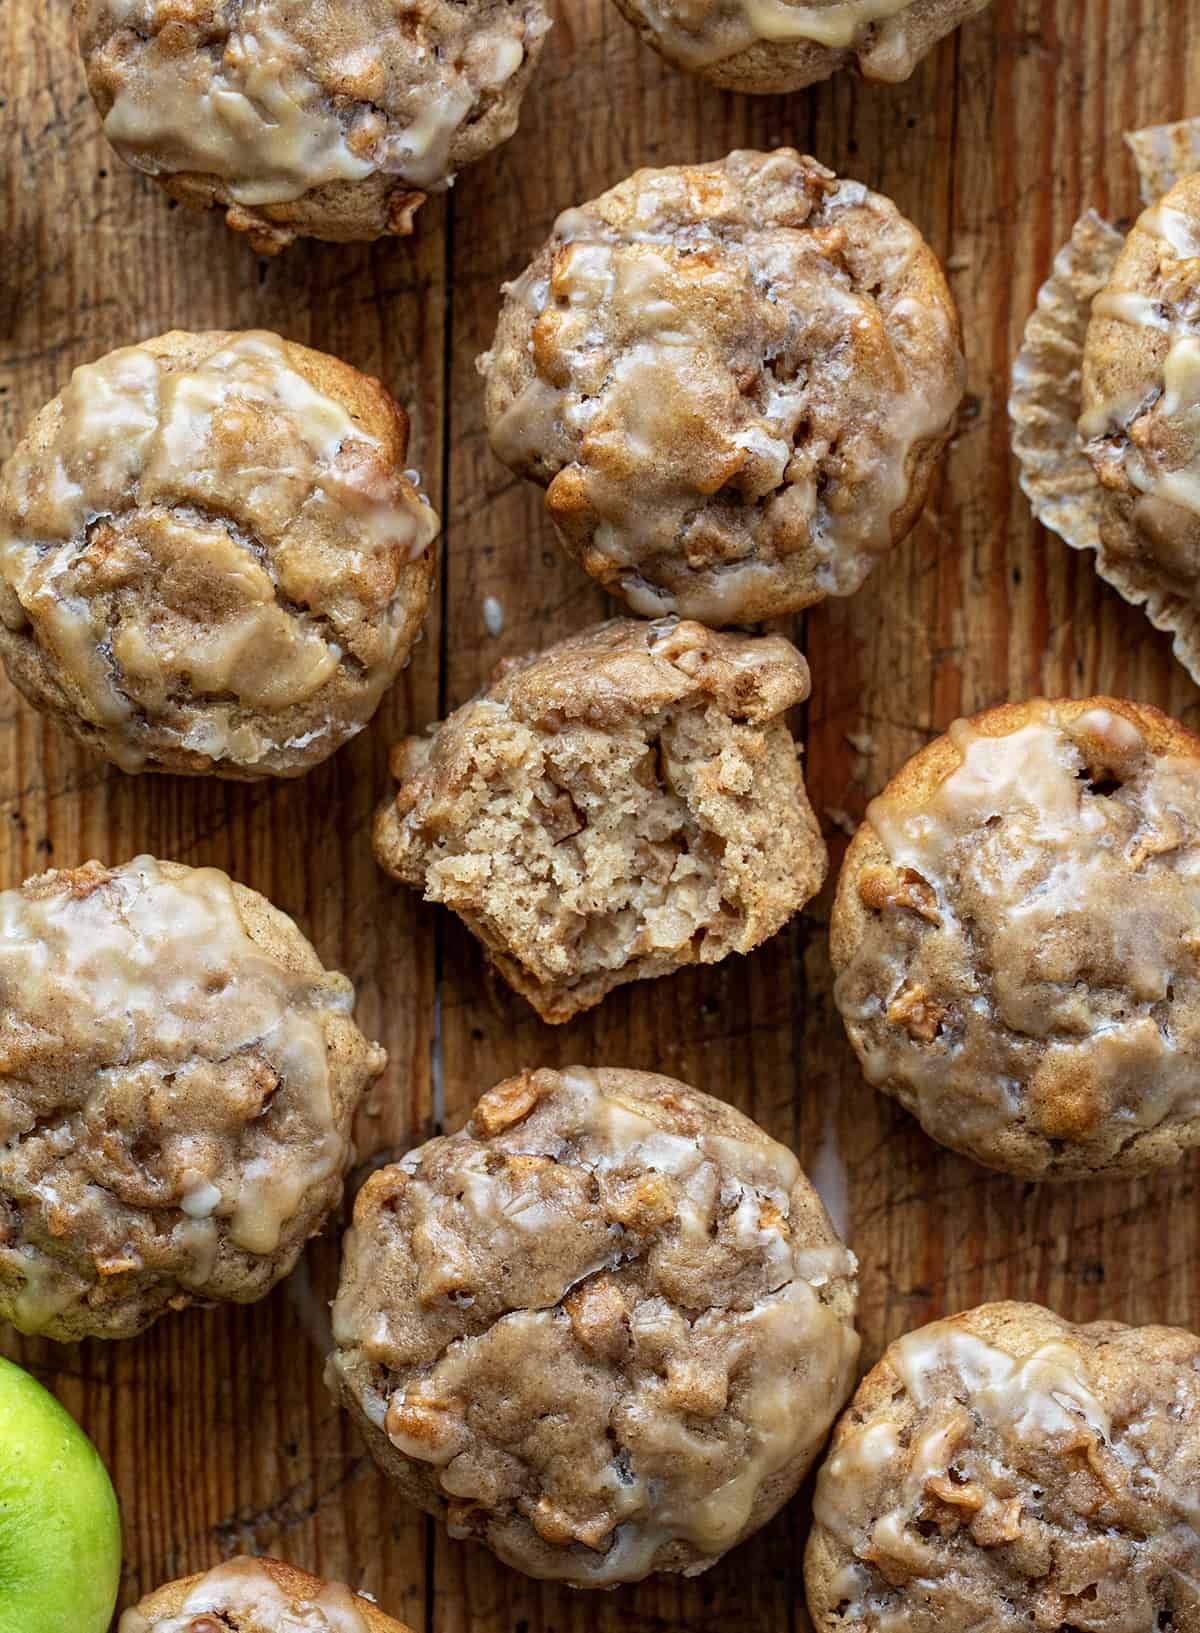 Apples Muffins on a Wooden Cutting Board with One Muffin Halved to Show Inside from Overhead.